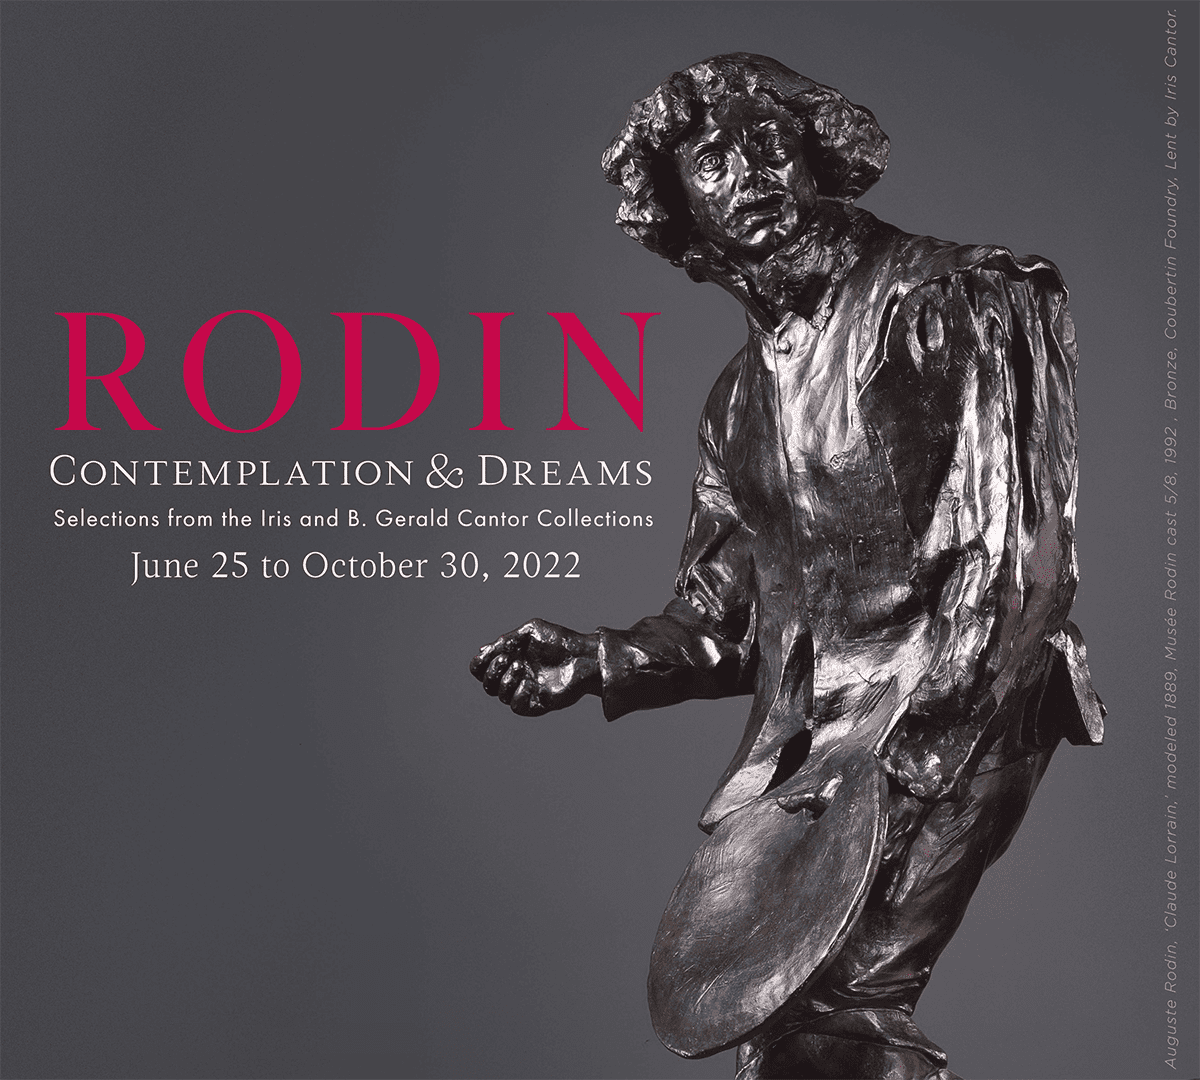 Rodin Contemplation & Dreams Selections from the Iris and B. Gerald Cantor Collections, June 25 to October 30, 2022